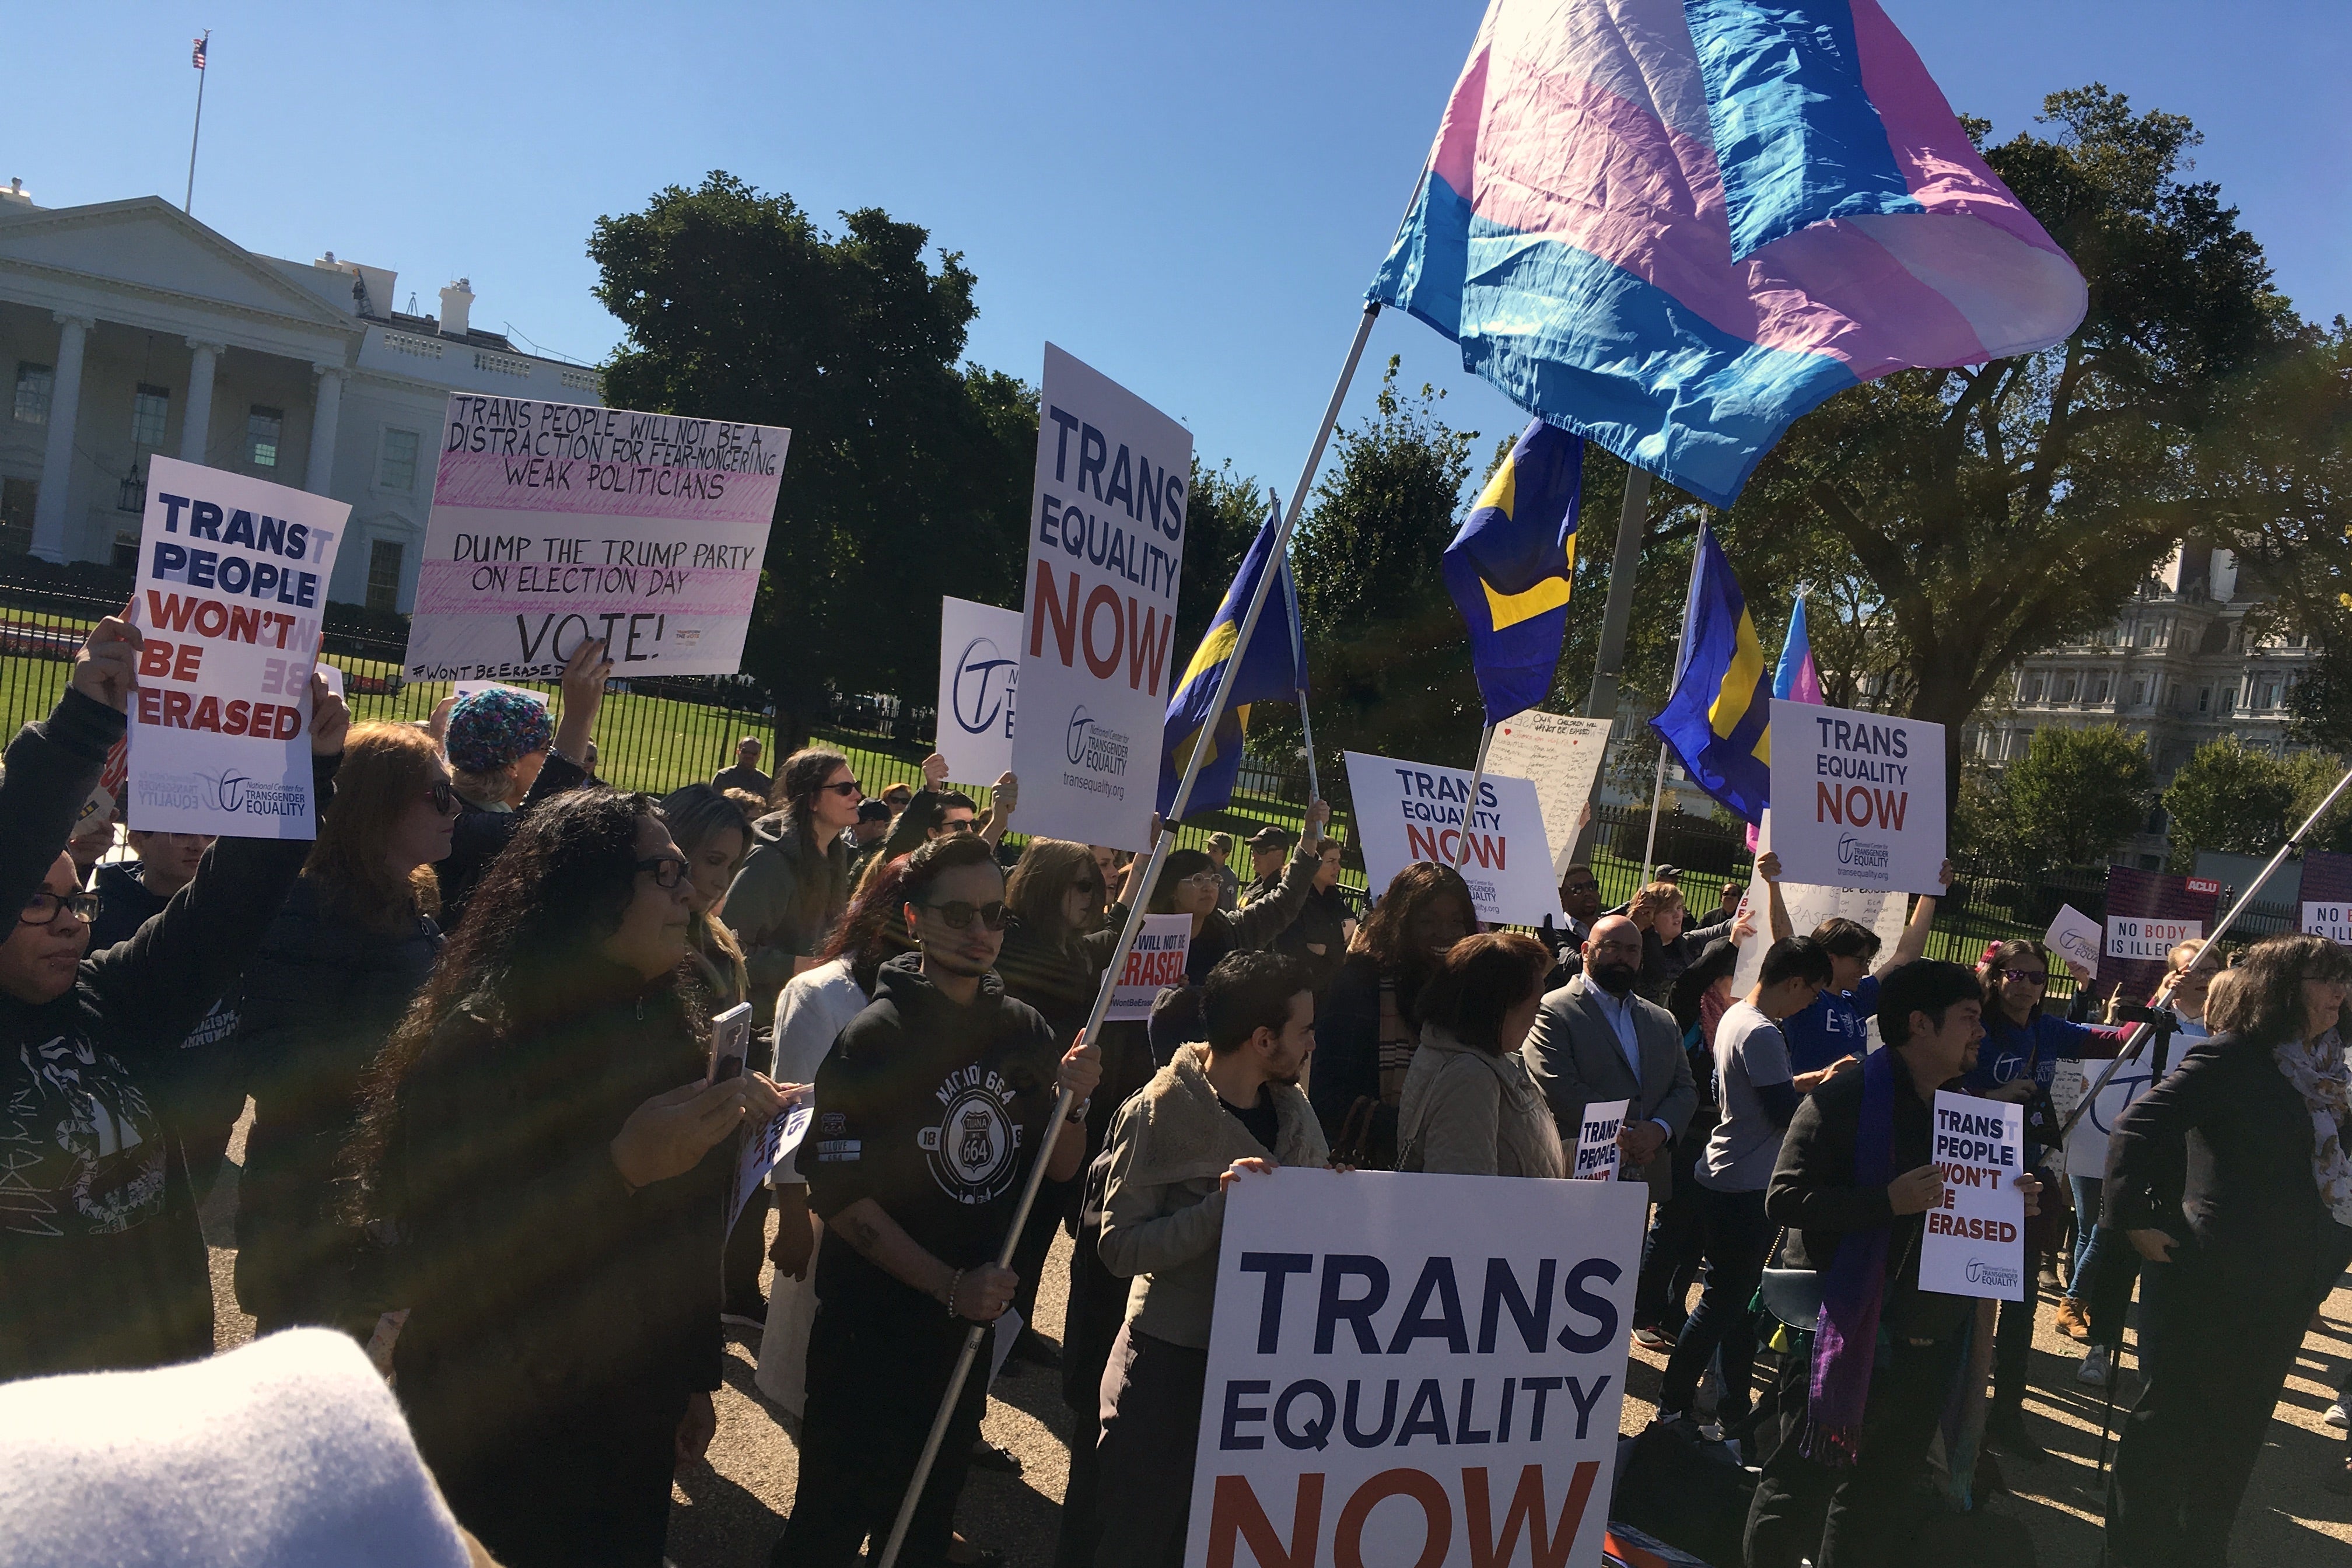 Demonstrators holding signs that say "Trans Equality Now" and "trans people won't be erased" and waving a trans flag stand in front of the White House.